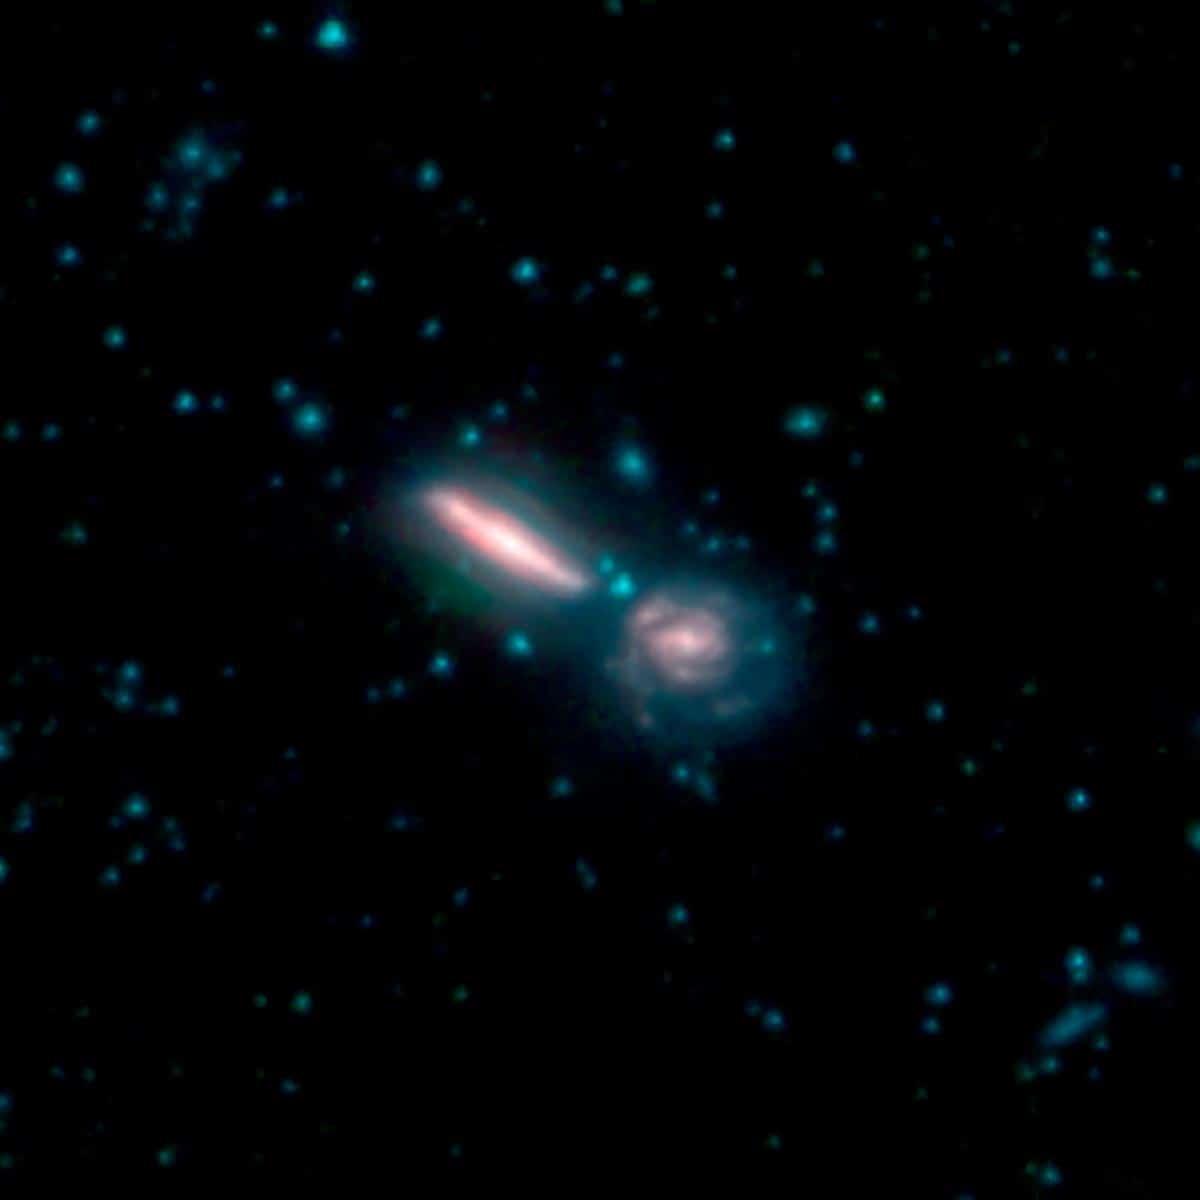 This image shows two merging galaxies known as Arp 302, also called VV 340. In these images, different colors correspond to different wavelengths of infrared light. Blue and green are wavelengths both strongly emitted by stars. Red is a wavelength mostly emitted by dust. Credit: NASA/JPL-Caltech